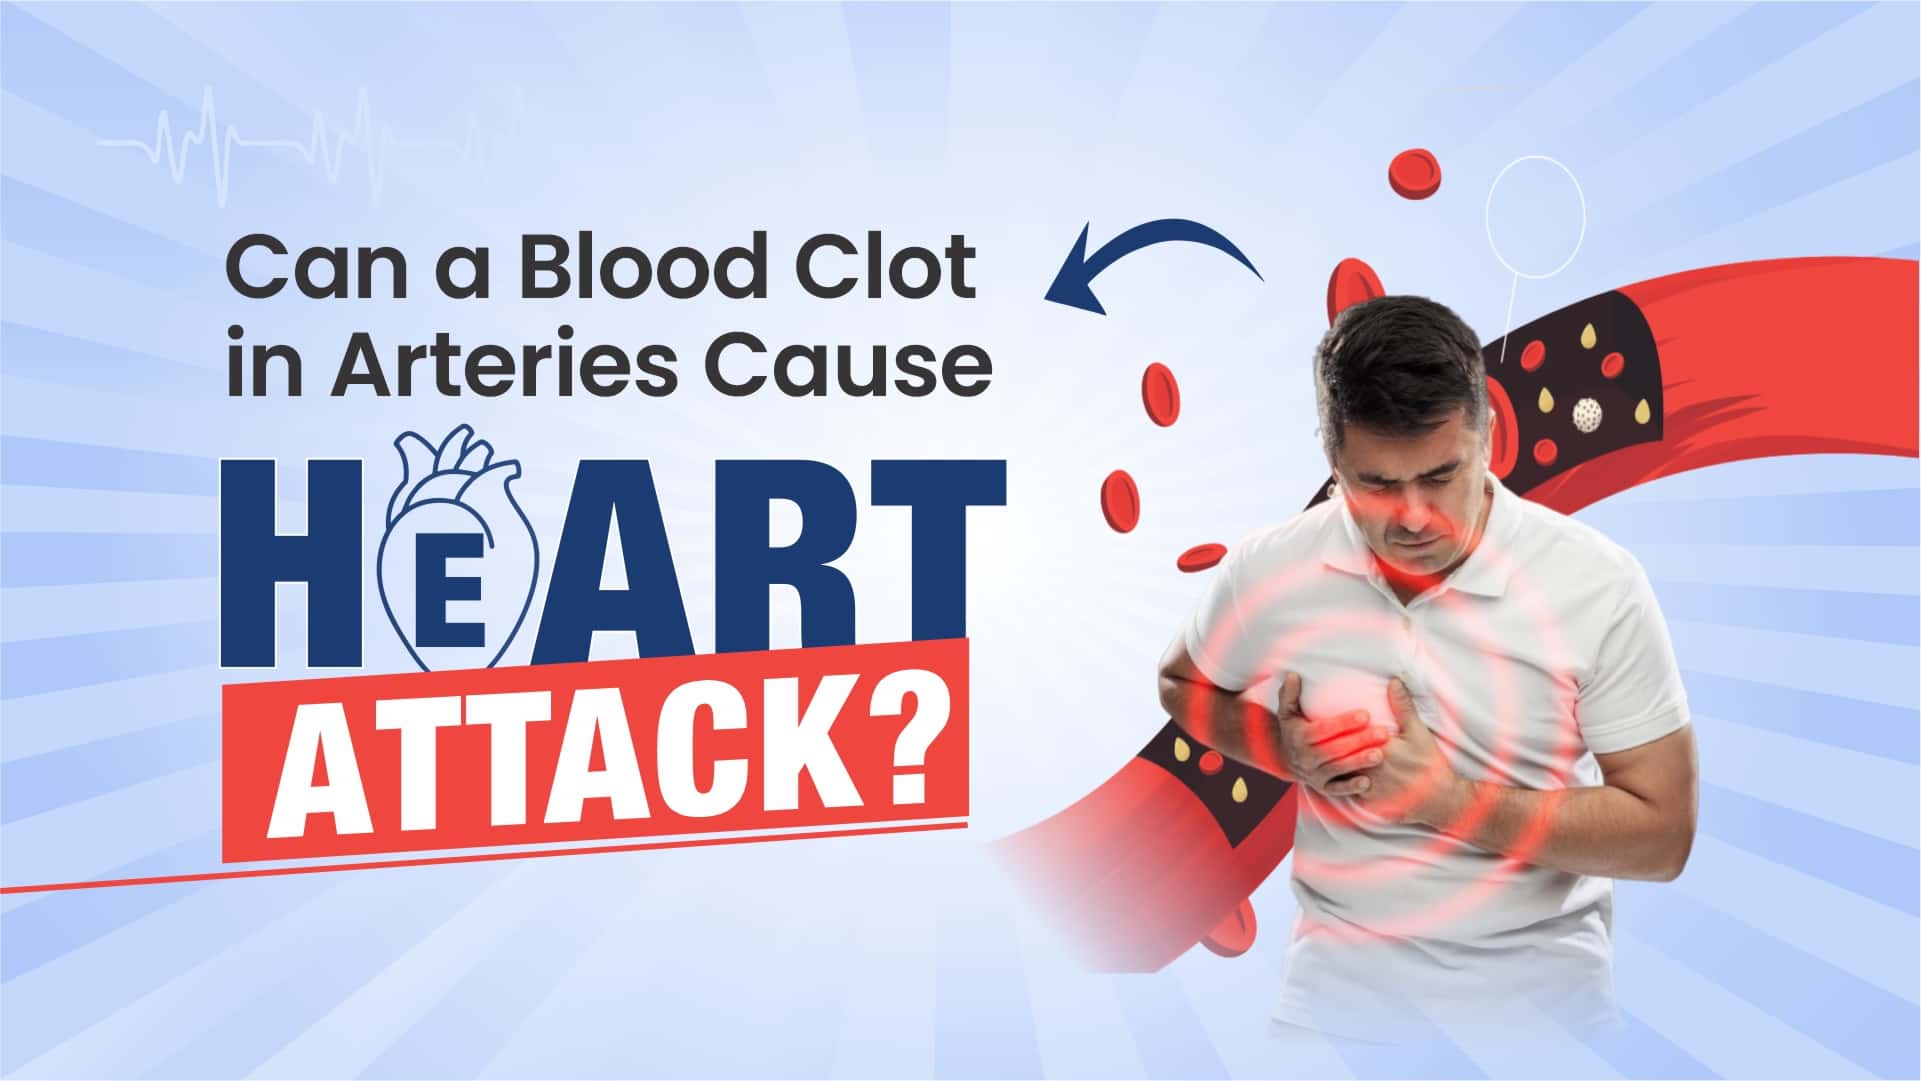 Can a Blood Clot in Arteries Cause Heart Attack?